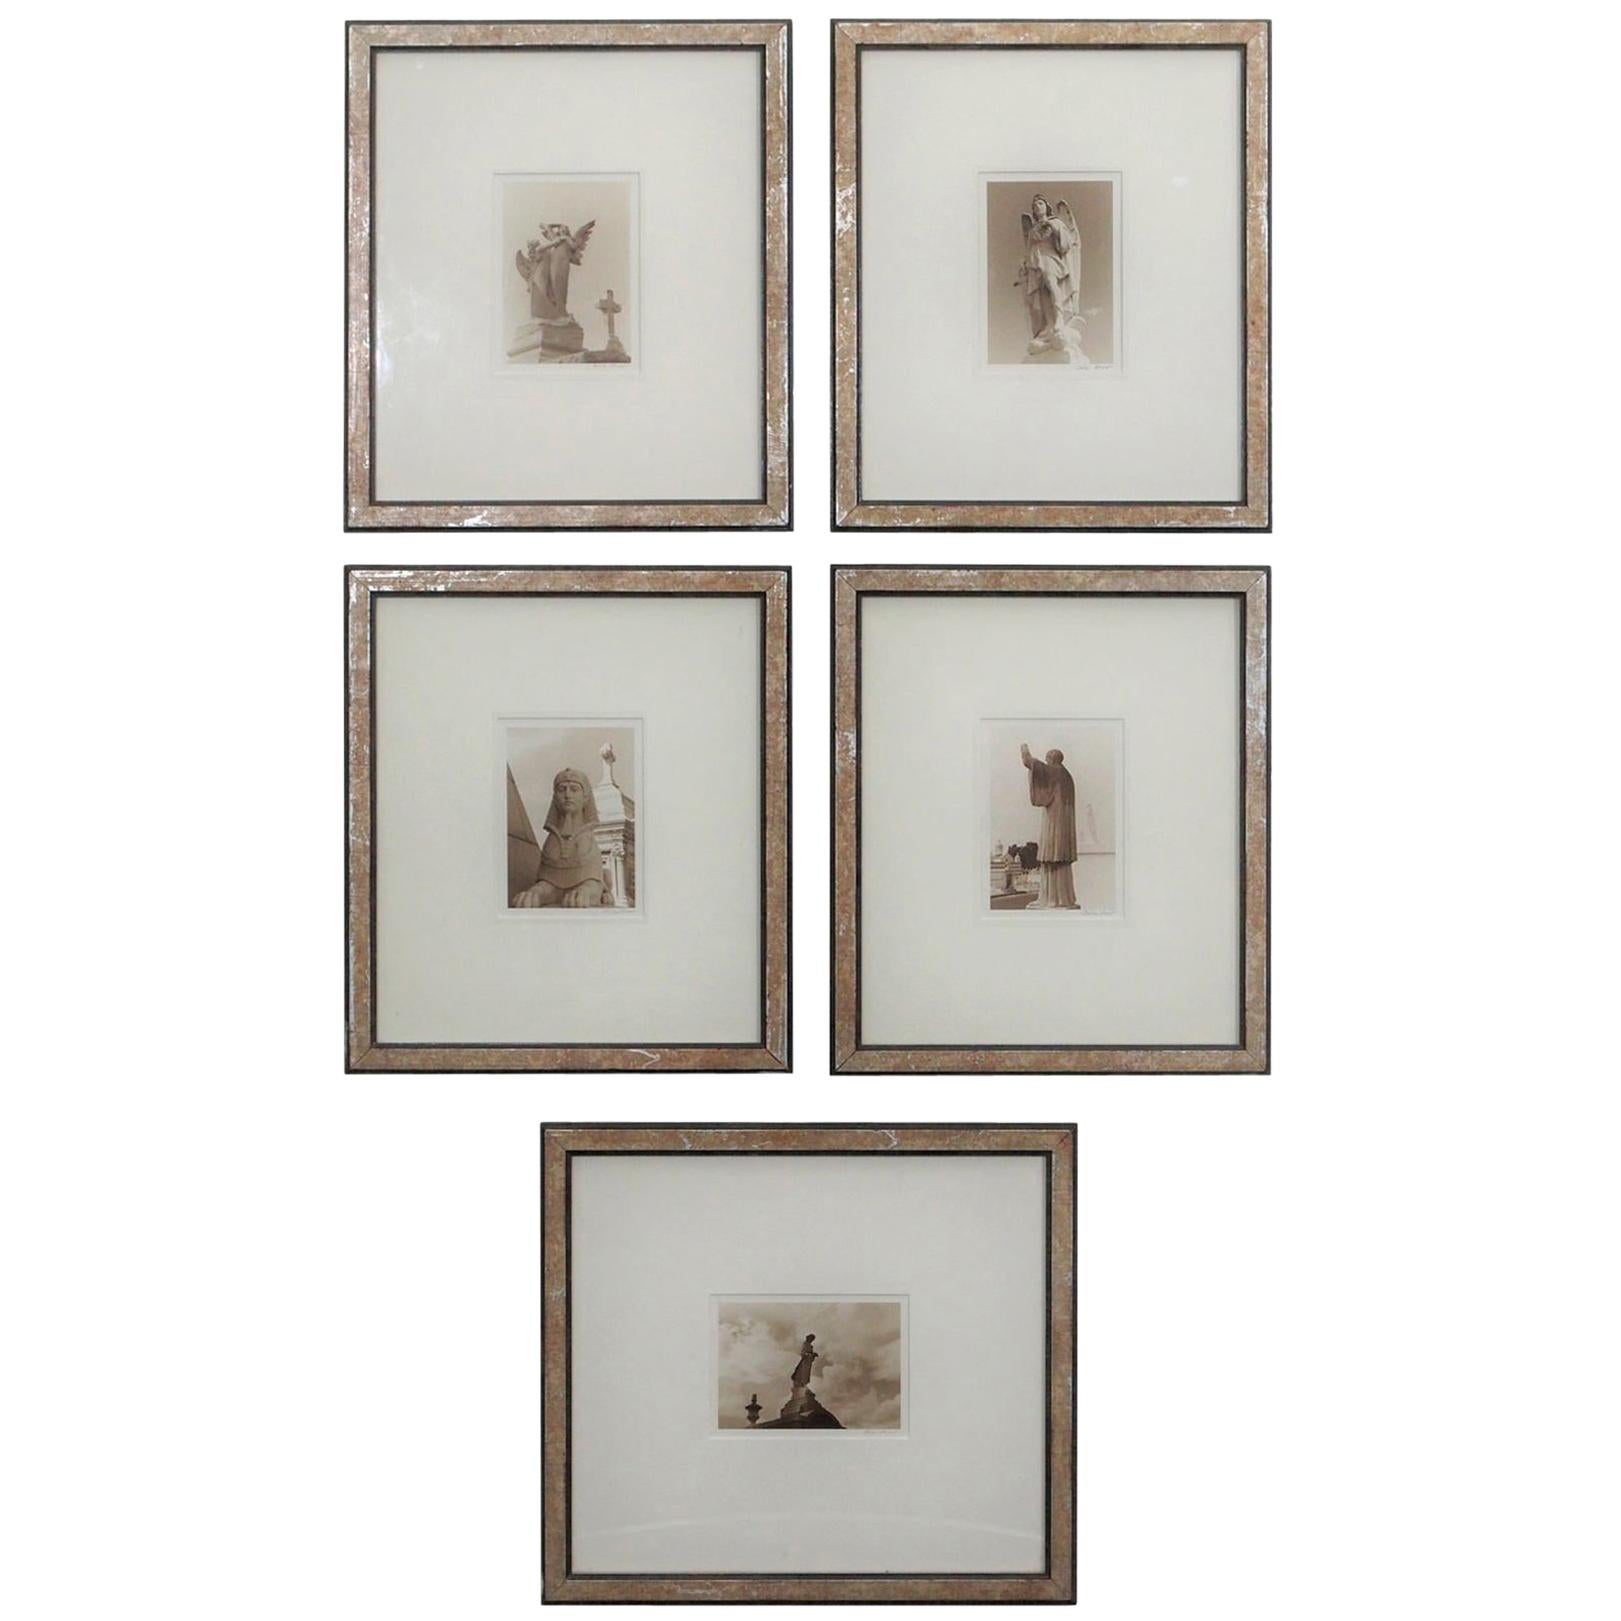 Set of 5 Cemetery Pictures, Photography of New Orleans in Sepia, Framed